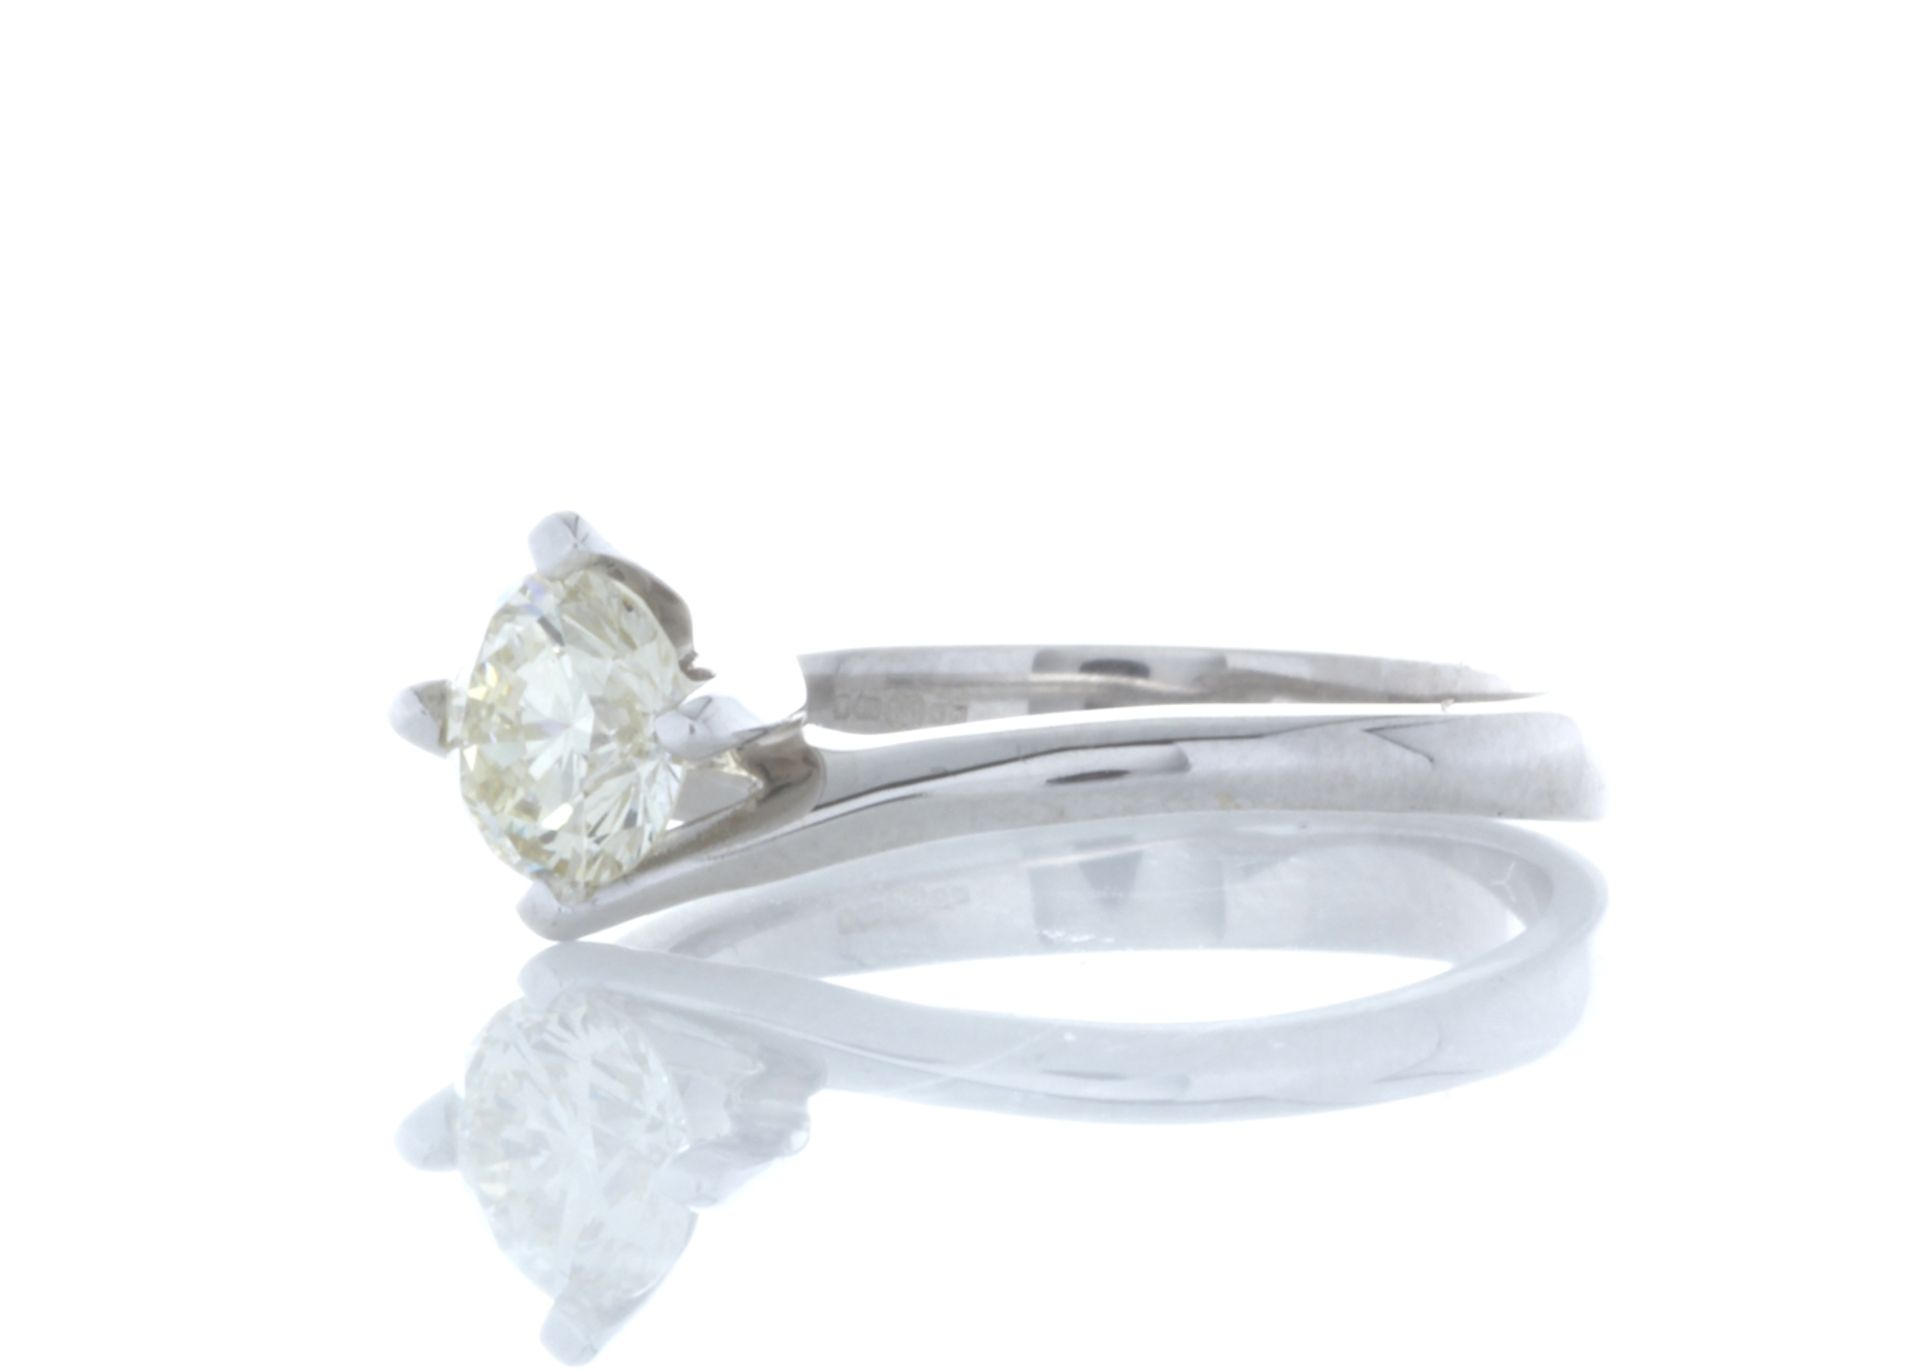 18ct White Gold Single Stone Fancy Claw Set Diamond Ring 0.71 Carats - Valued by IDI £7,250.00 - - Image 2 of 5